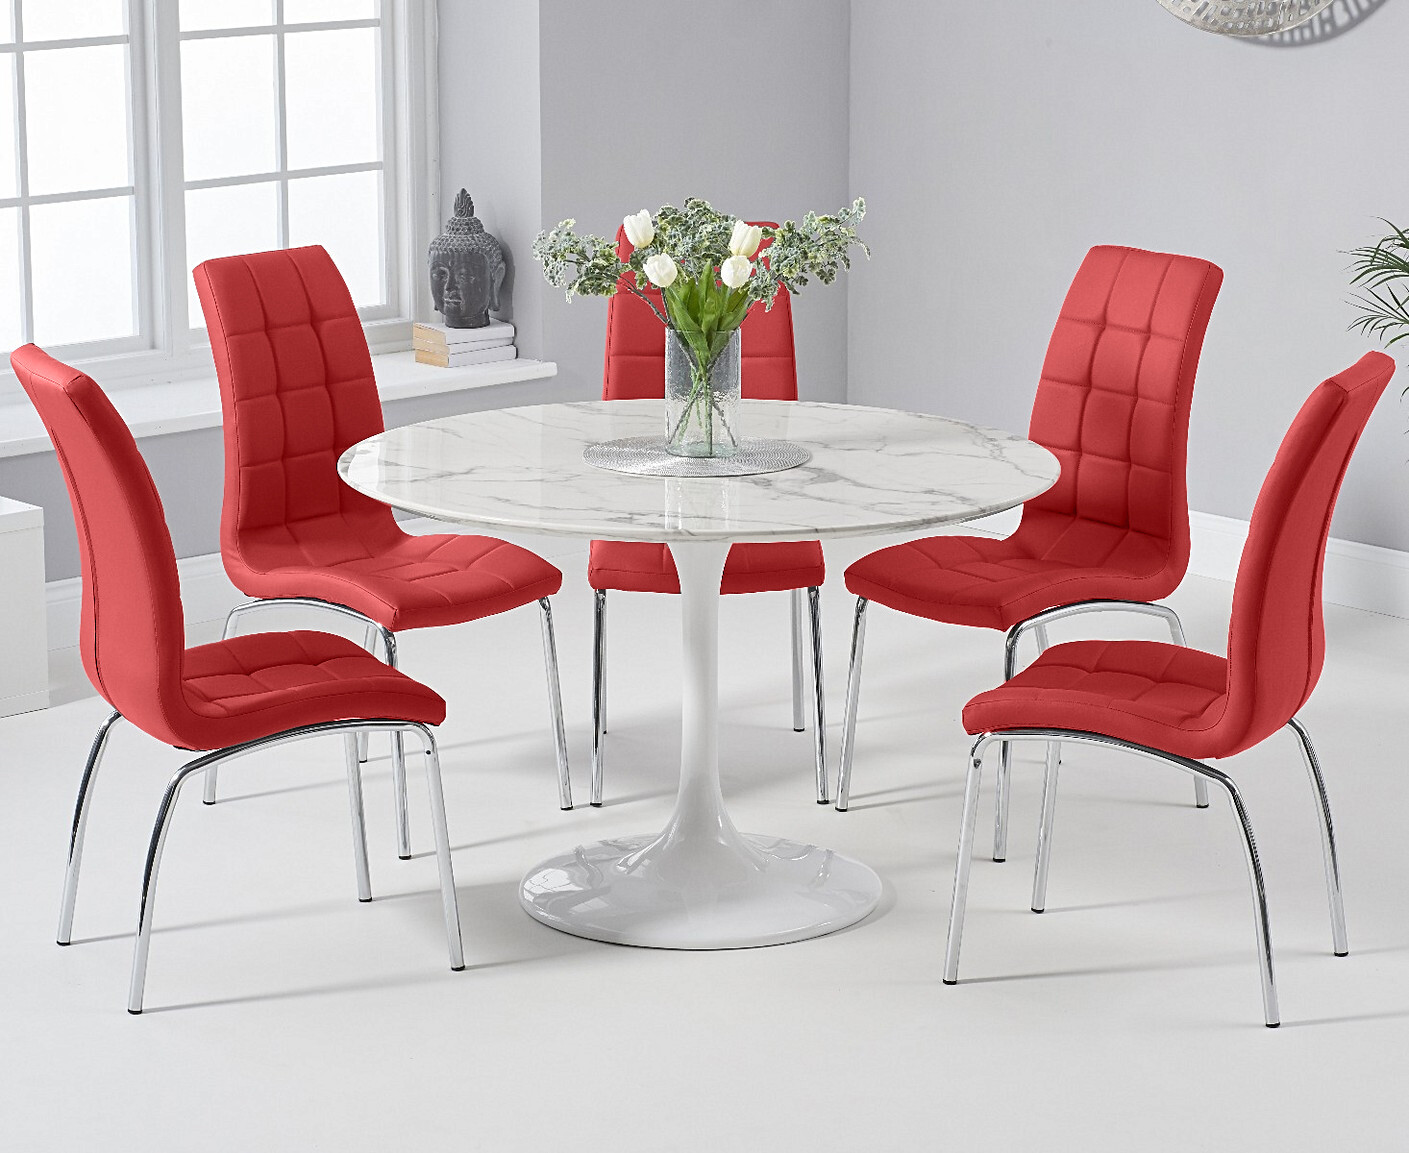 Brighton 120cm Round Marble White Dining Table With 4 Red Enzo Chairs